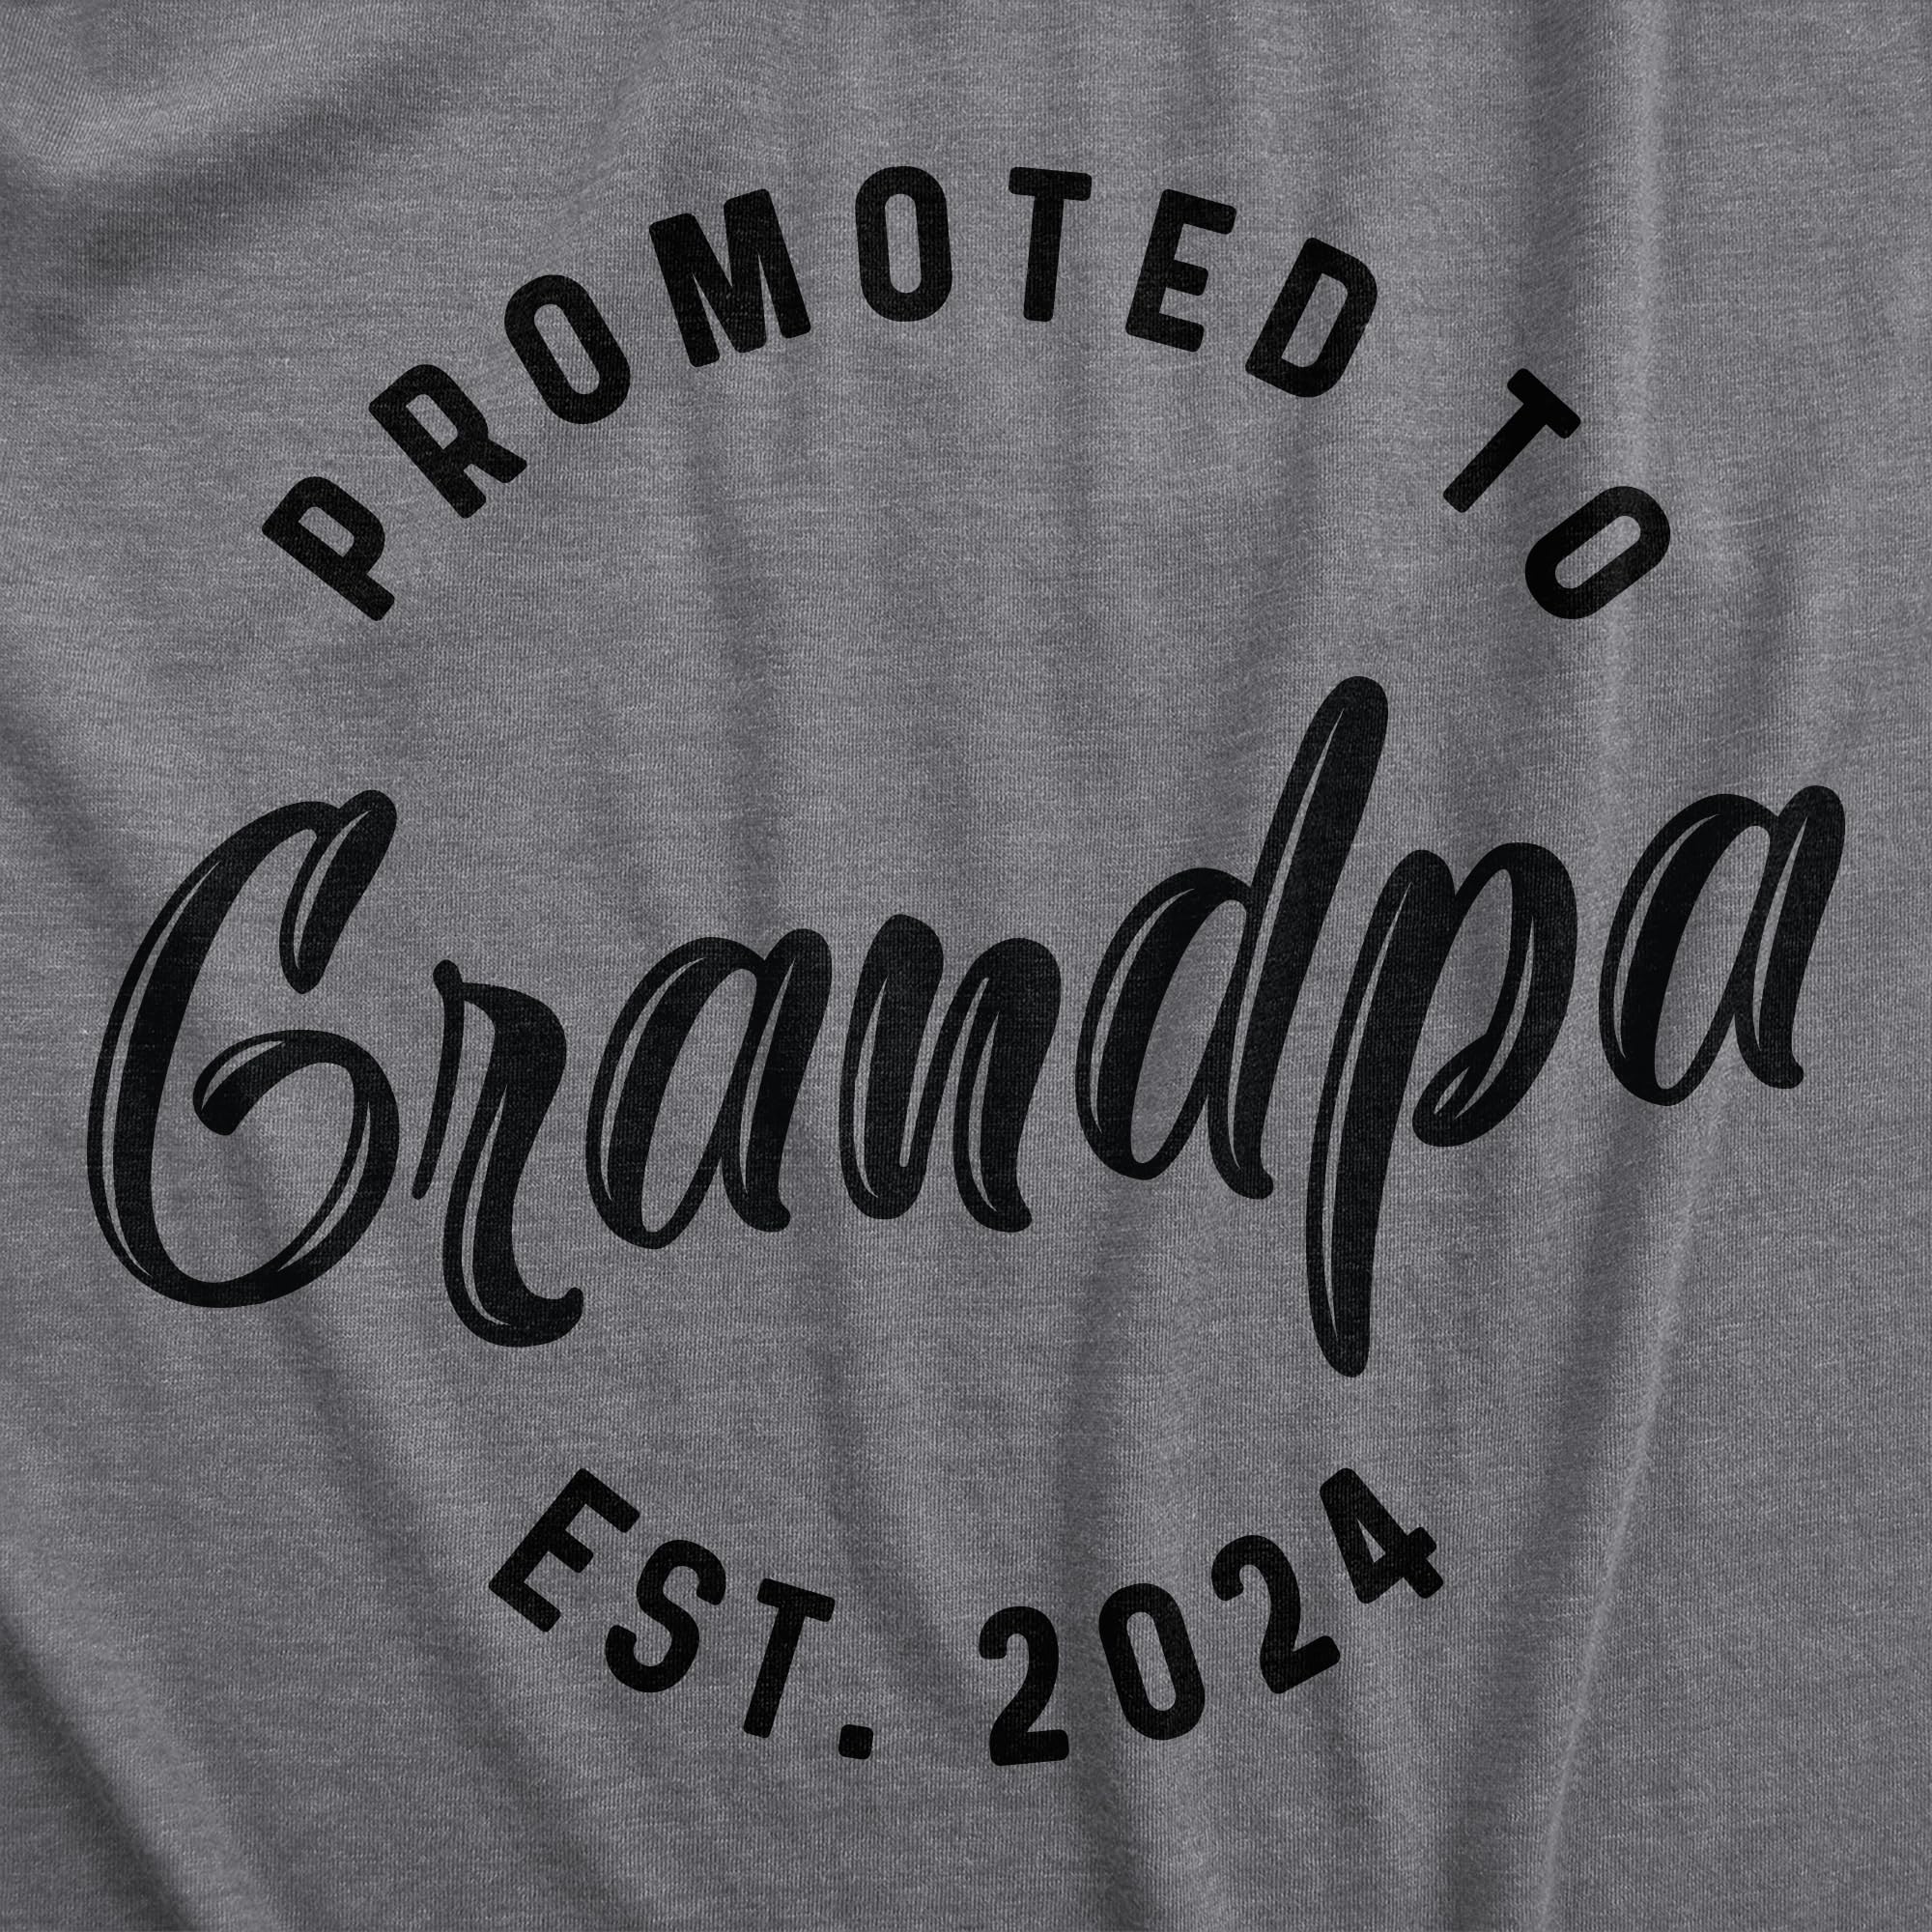 Crazy Dog Mens Promoted to Grandpa 2024 2023 2022 Graphic T Shirt New Baby Family Tee